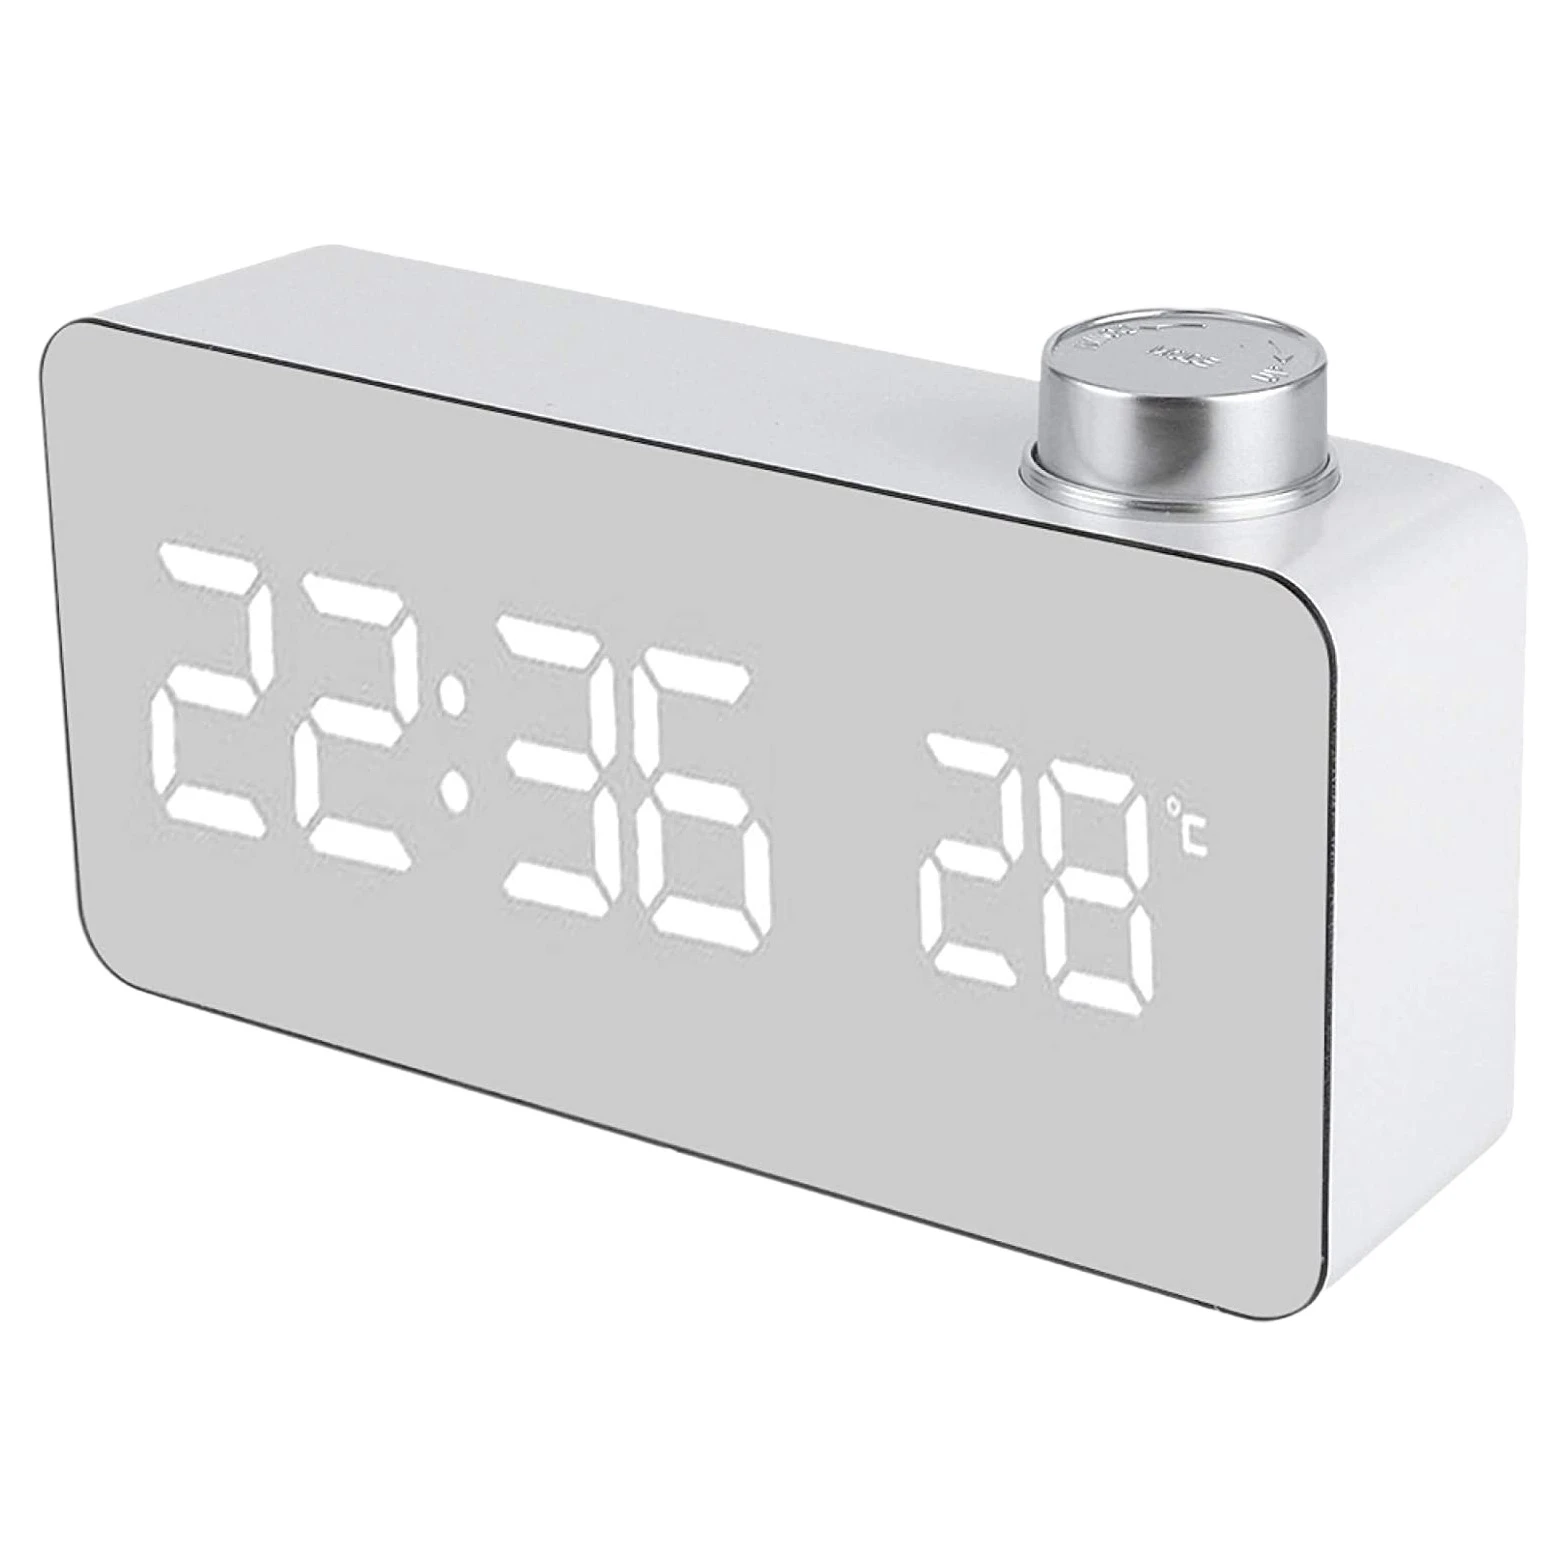 

Digital Alarm Clock USB Battery Electric LED Clocks 12/24H with Mirror TimeTemperature Snooze for Bedrooms Bedside,White